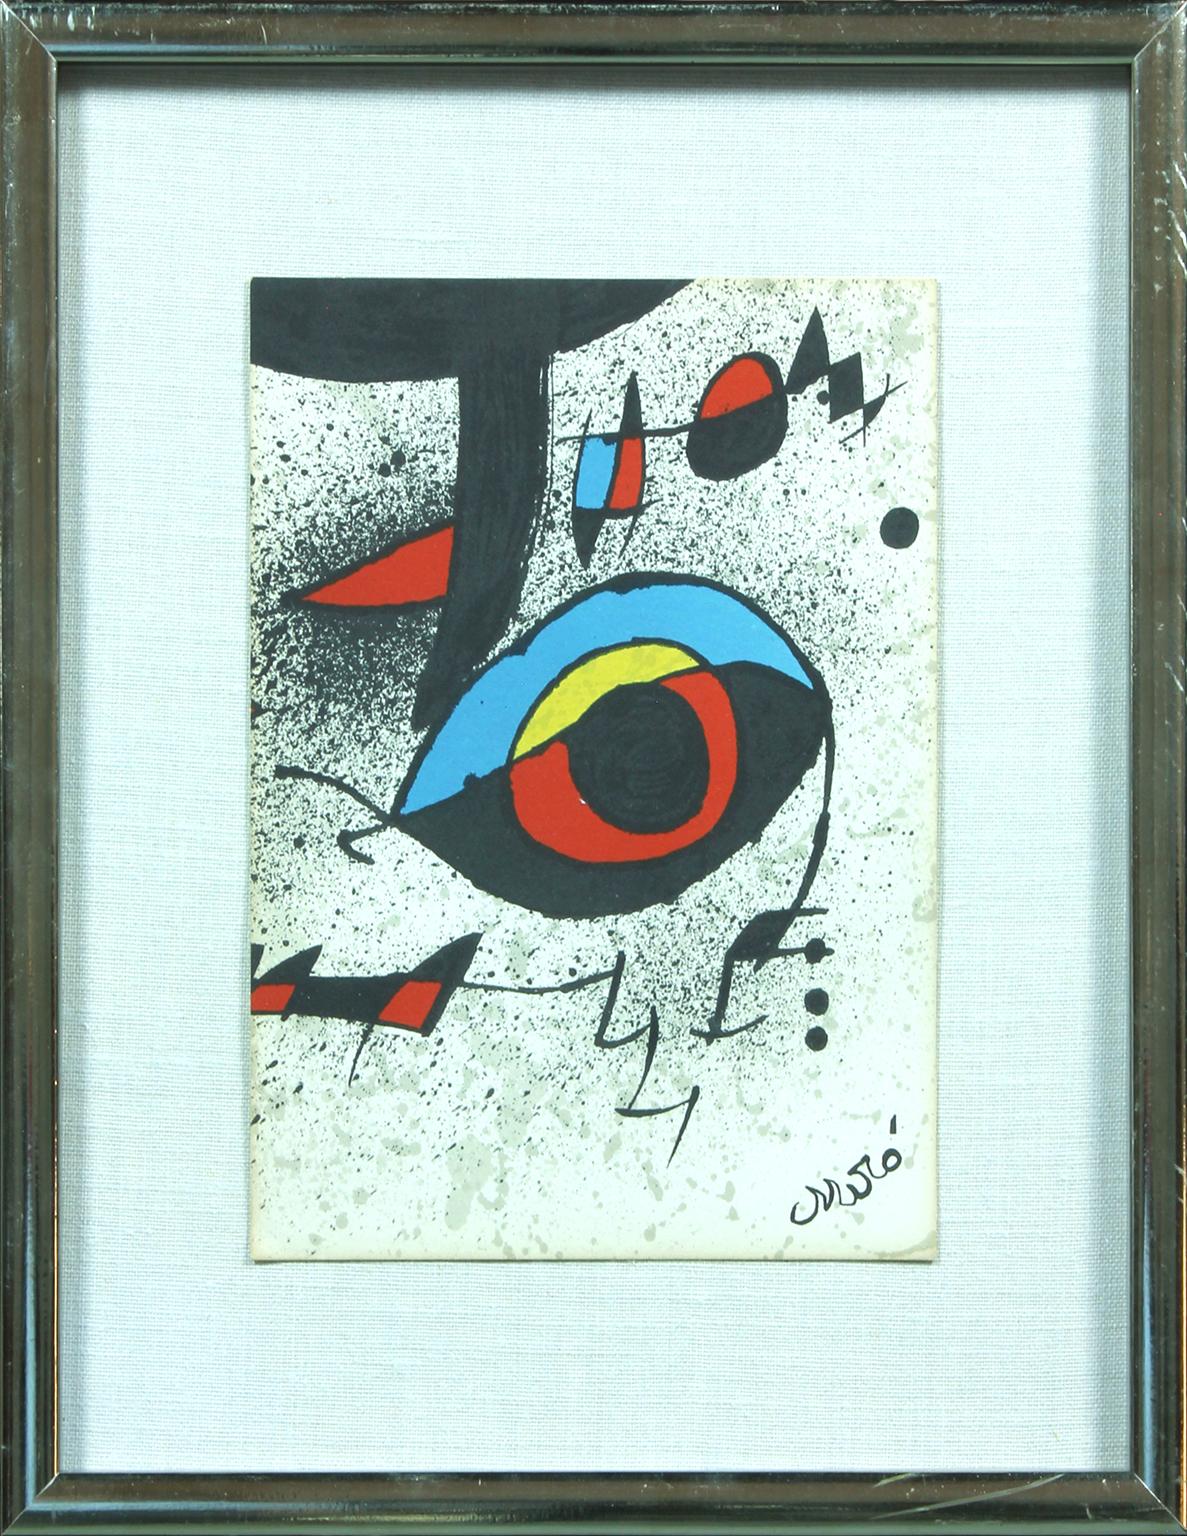 Joan Miró Abstract Print - Untitled plate-signed lithograph by Joan Miro.